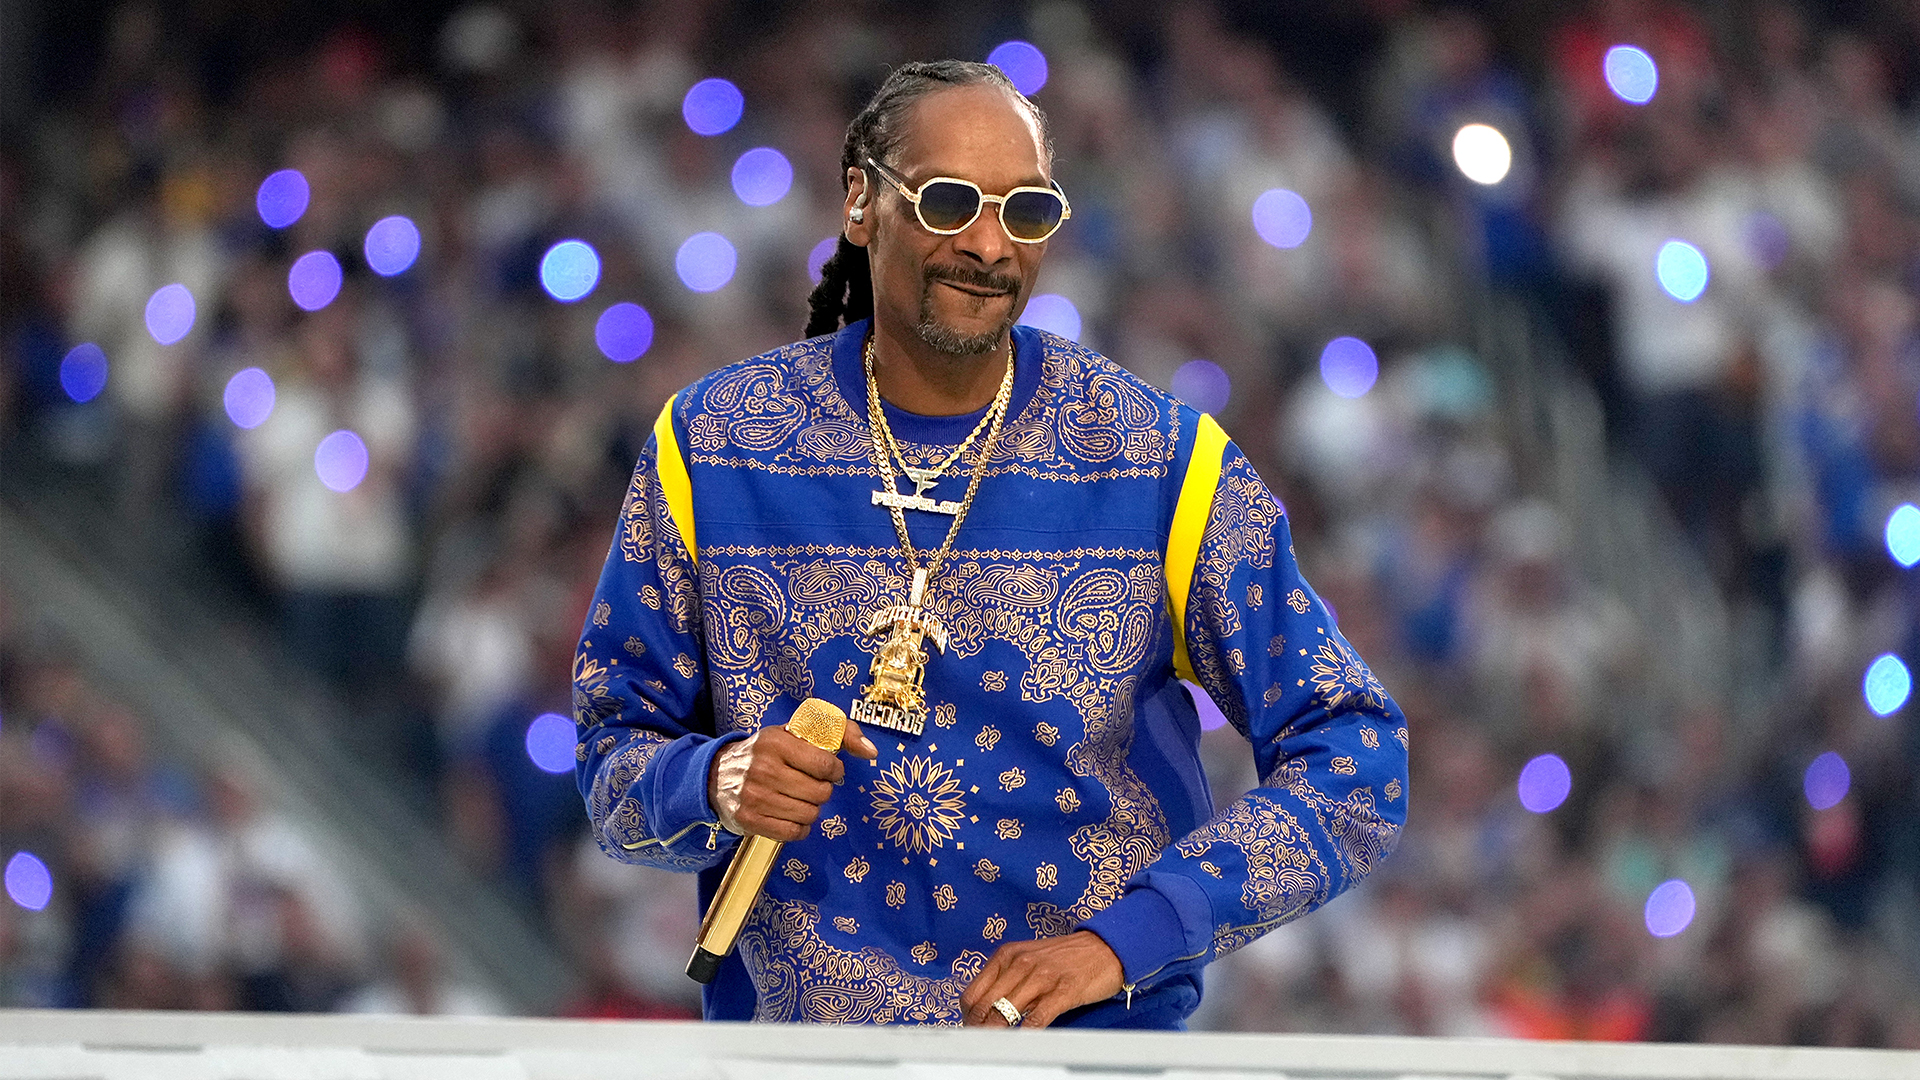 Snoop Dogg Reveals Plans To Create A Streaming Platform He Says Will Be 'Similar To Amazon, Netflix, Hulu'